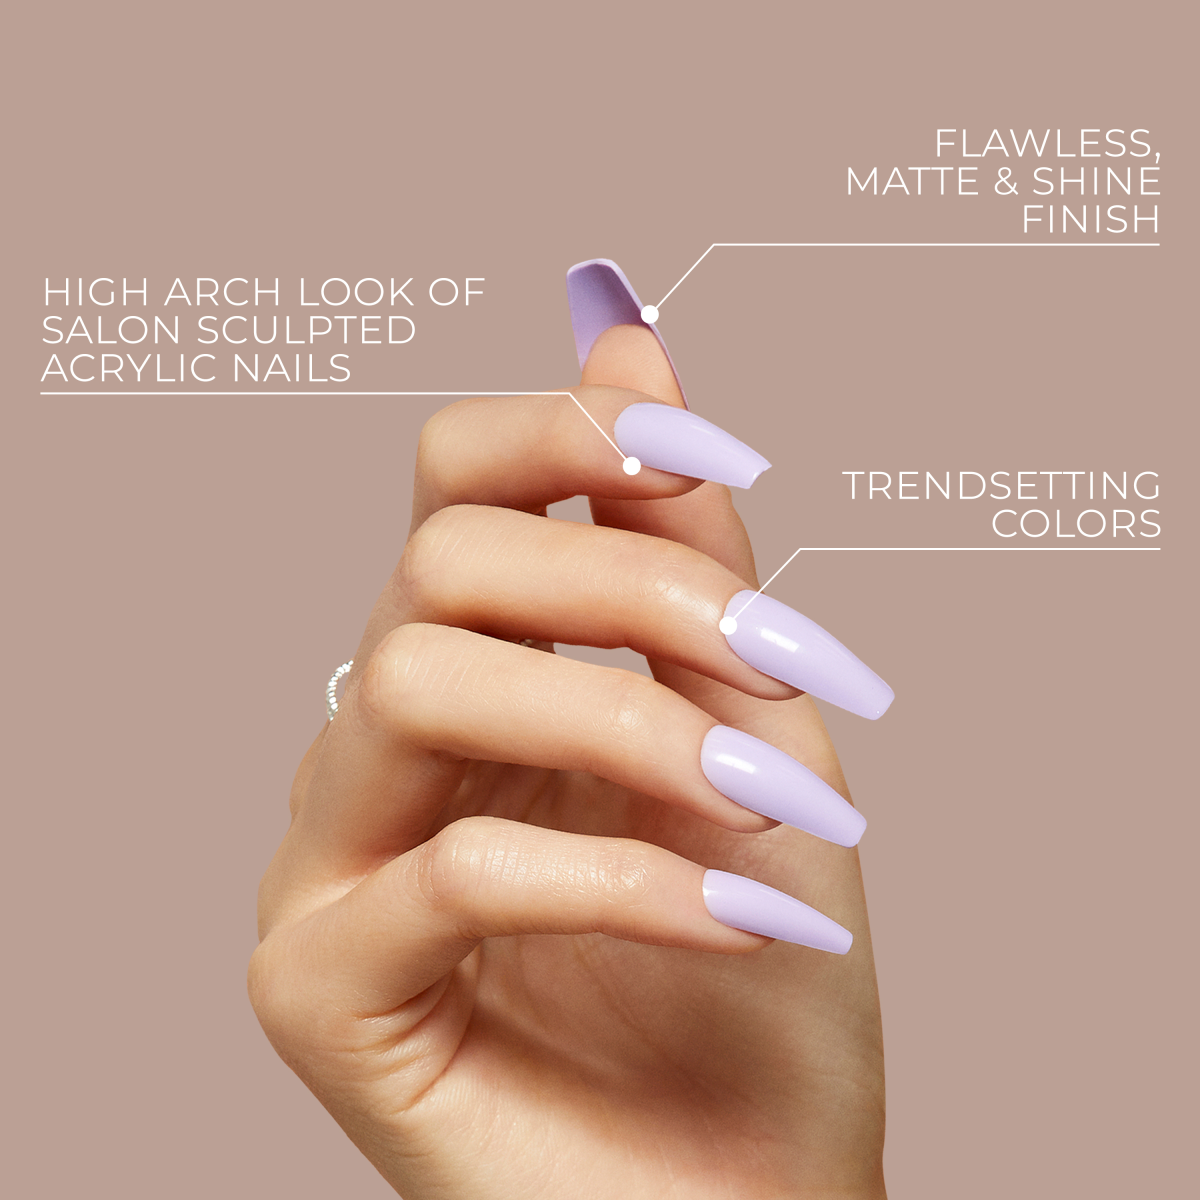 Overlay Nails: Meaning, Types and Nail Looks